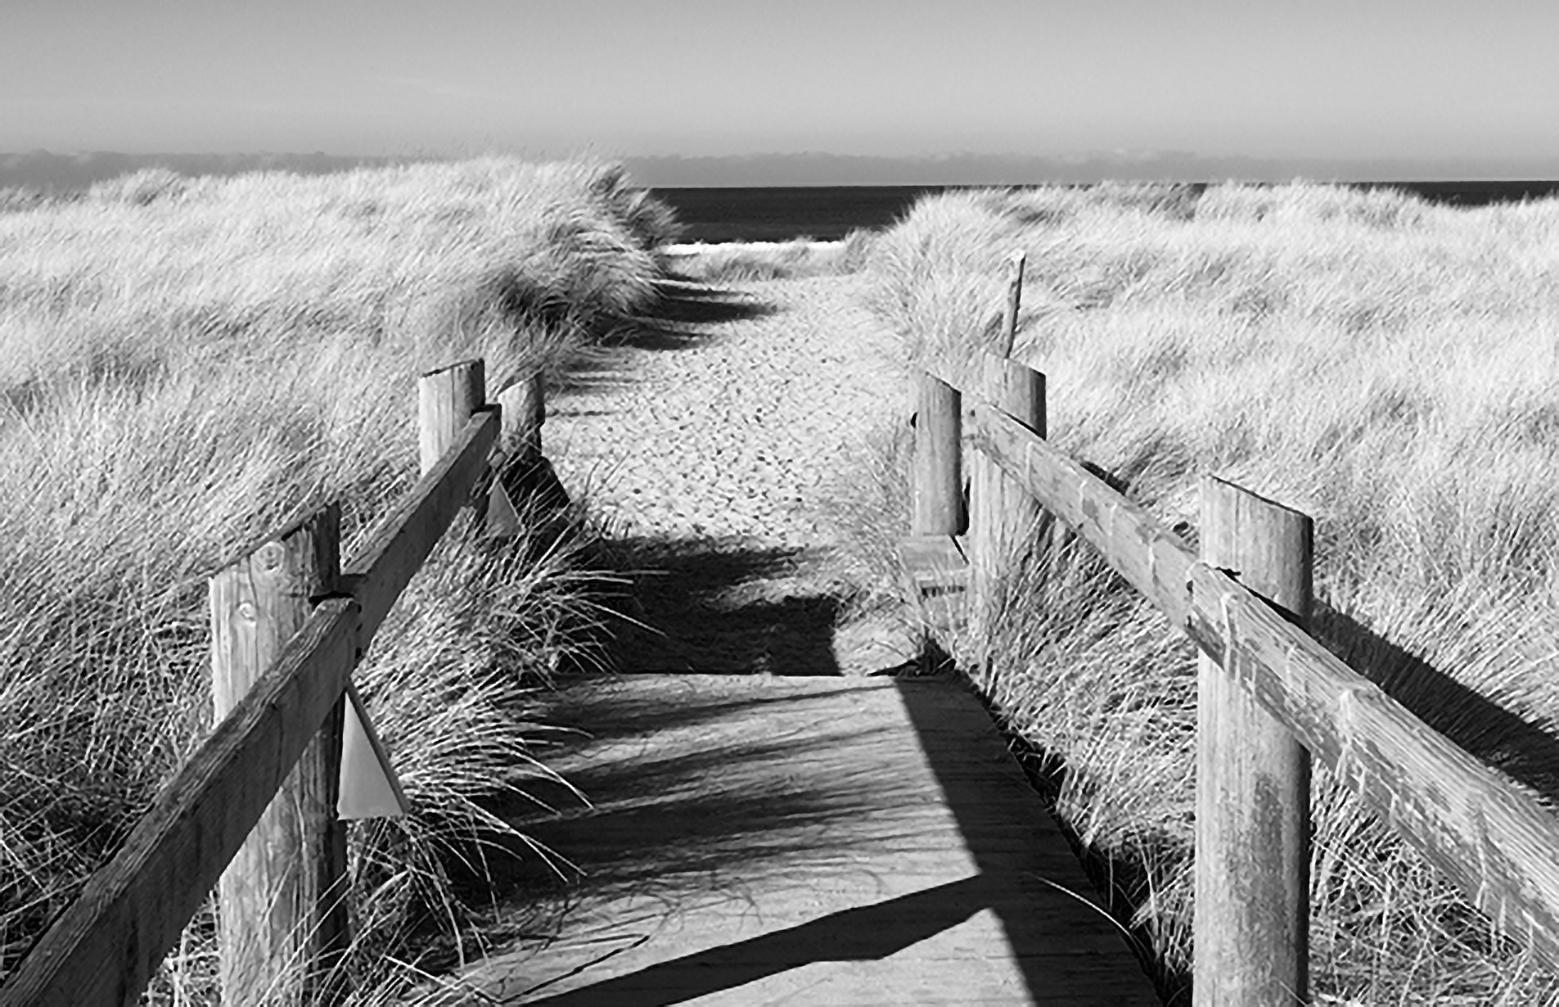 Crossing - contemporary black/white landscape photography with dock to ocean  - Photograph by Michael Götze